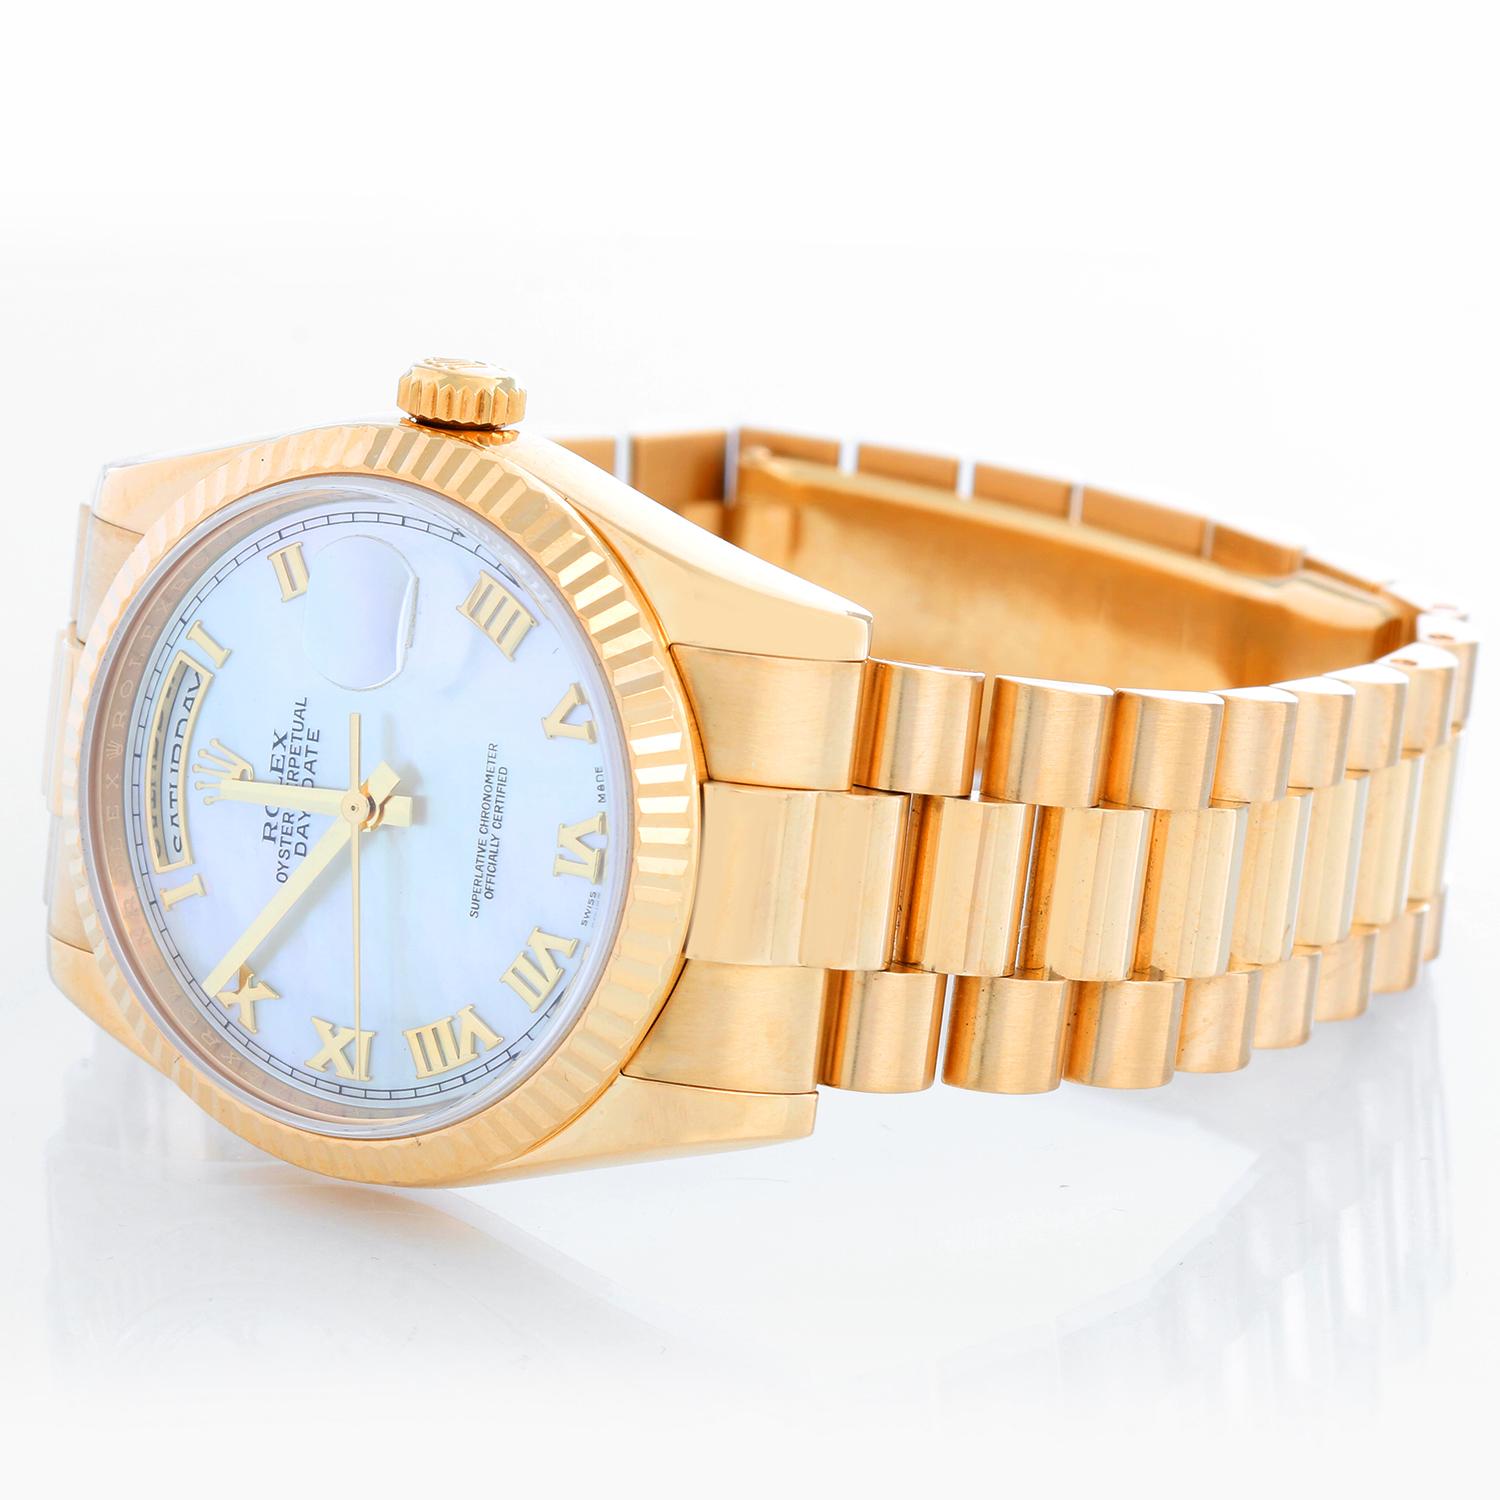 Rolex President Day-Date Men's Watch 118238 - Automatic winding, 31 jewels, Quickset, sapphire crystal. 18k yellow gold case with fluted bezel (36mm diameter). Genuine Rolex Mother of Pearl dial with Roman numerals. 18k yellow gold hidden-clasp